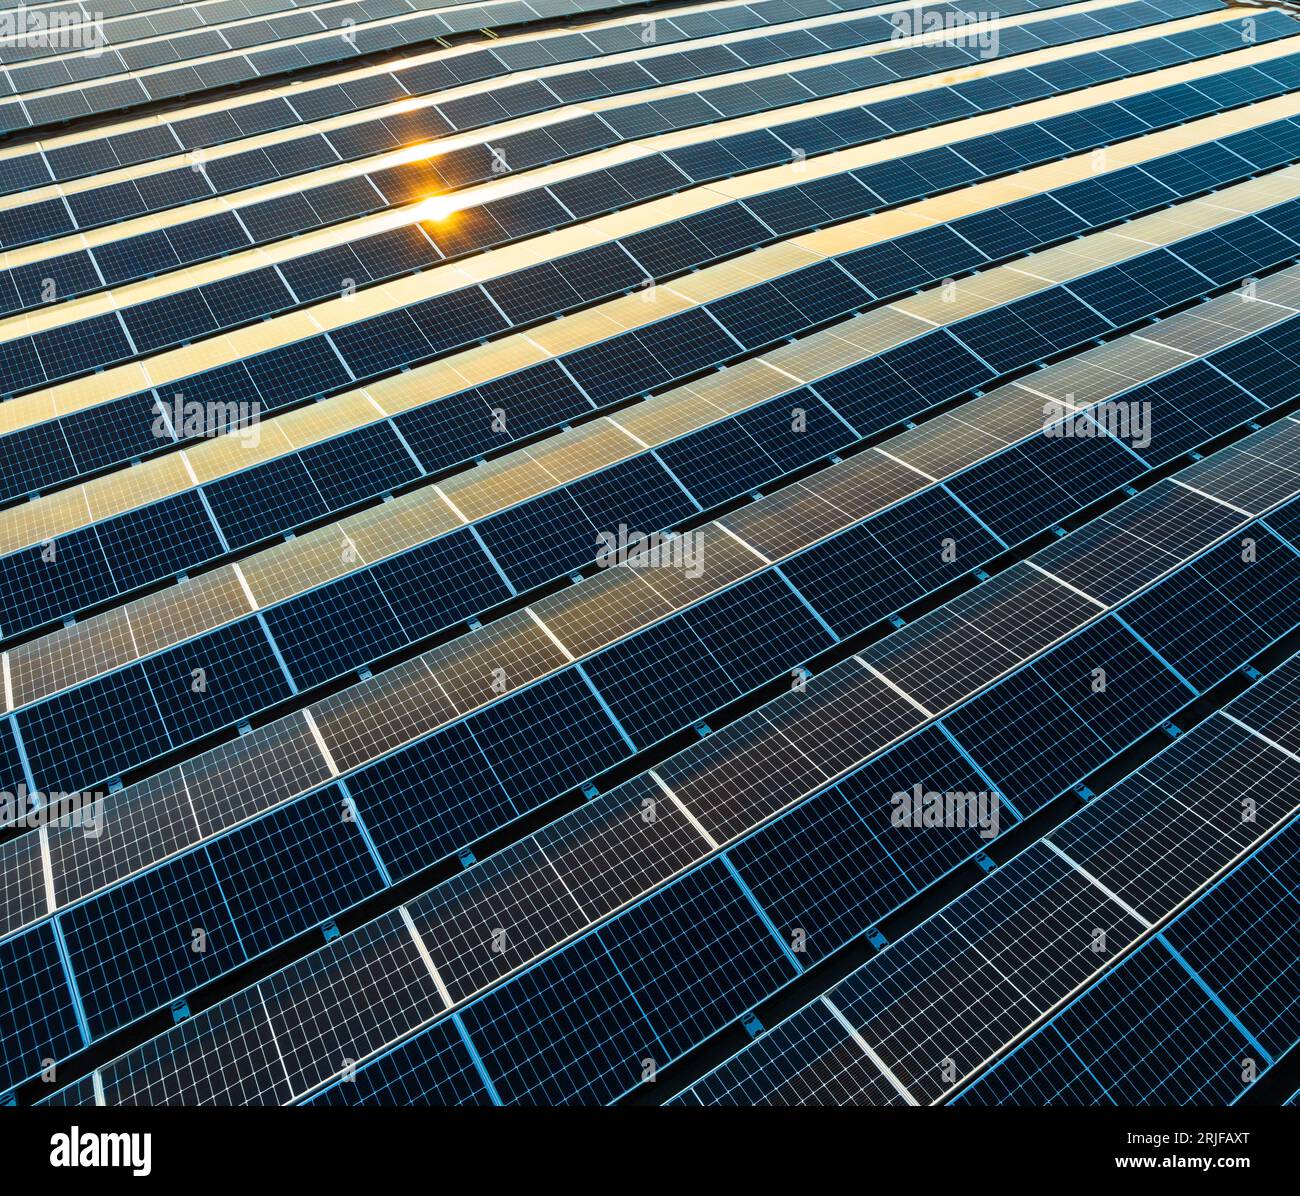 industrial warehouse with roof loaded with solar panels Stock Photo